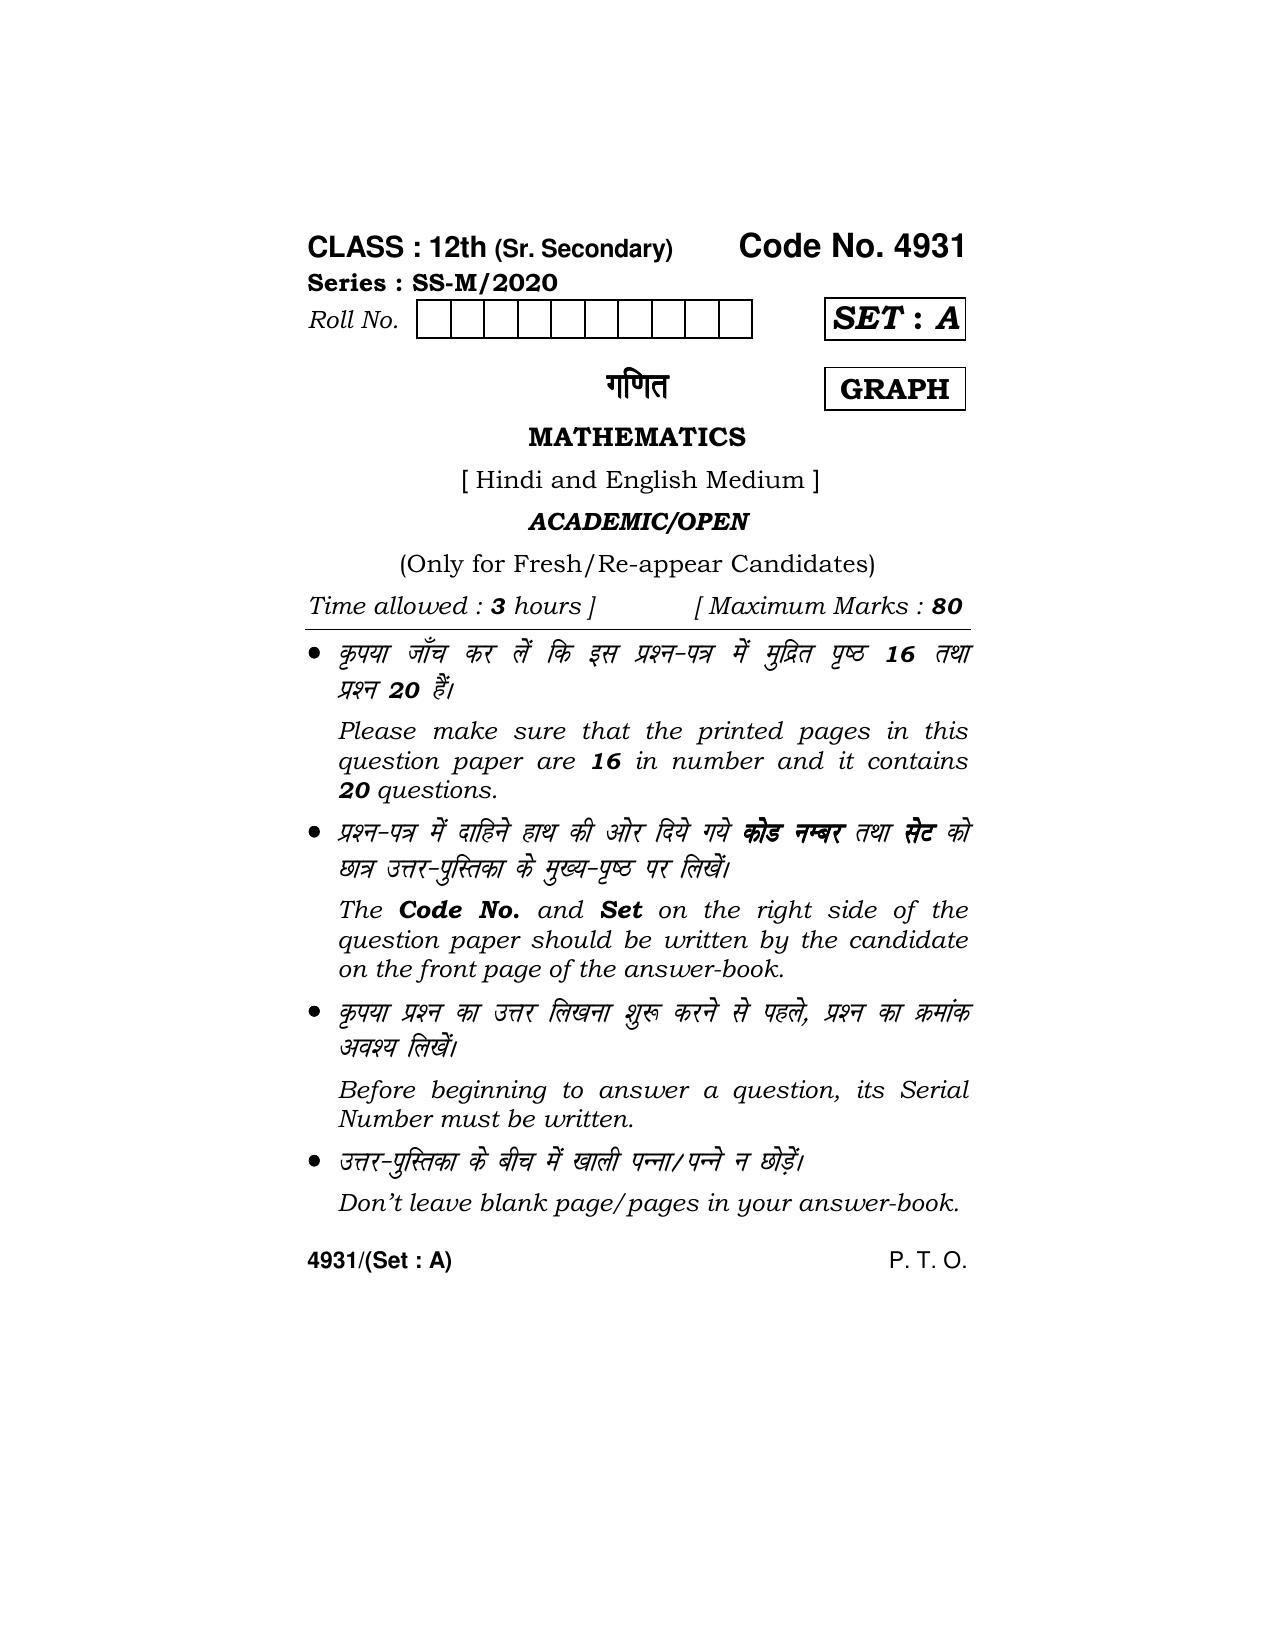 Haryana Board HBSE Class 12 Mathematics 2020 Question Paper - Page 1